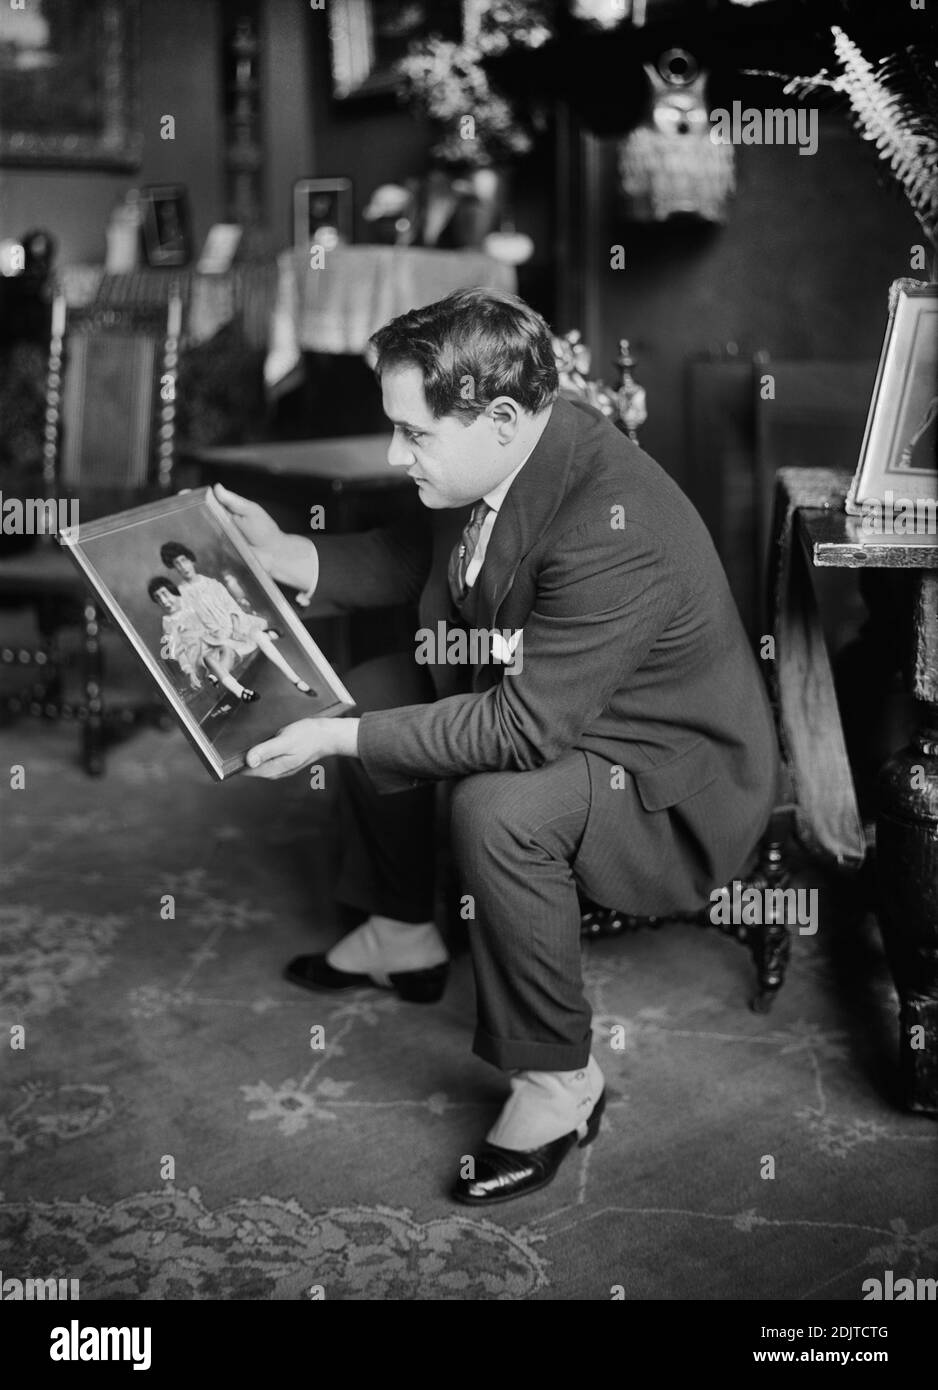 Opera Singer Beniamino Gigli (1890-1957), wearing Spats, holding Photograph of Two Children, Bain News Service, early 1920's Stock Photo